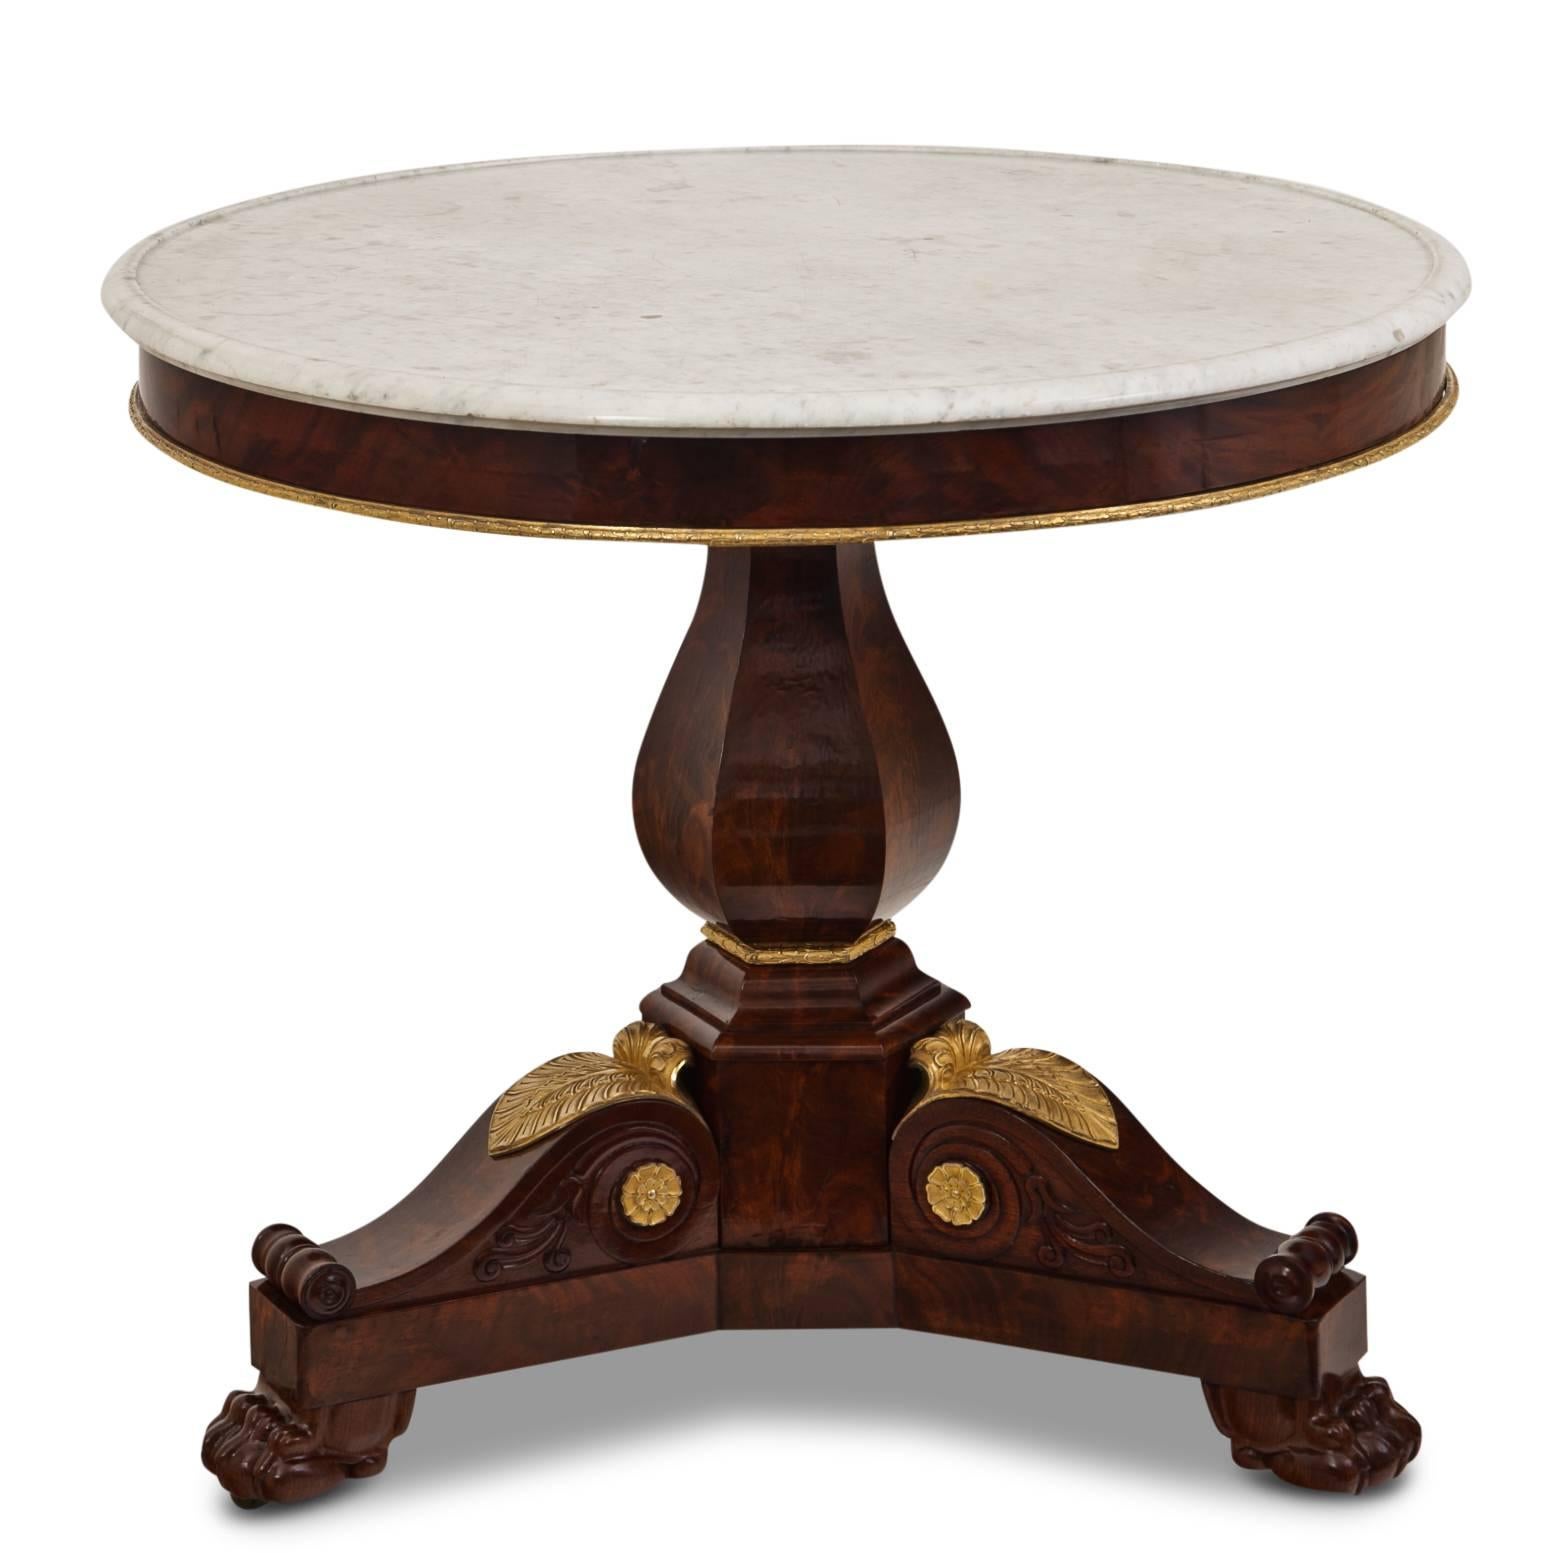 Elegant Empire Salon table on a trefoil base with lion's paws. Each foot consists of a large scroll with a gilt acanthus leave and flowers on each side. The round table top is white marble, the lower edge is decorated with a gilt brass strip.